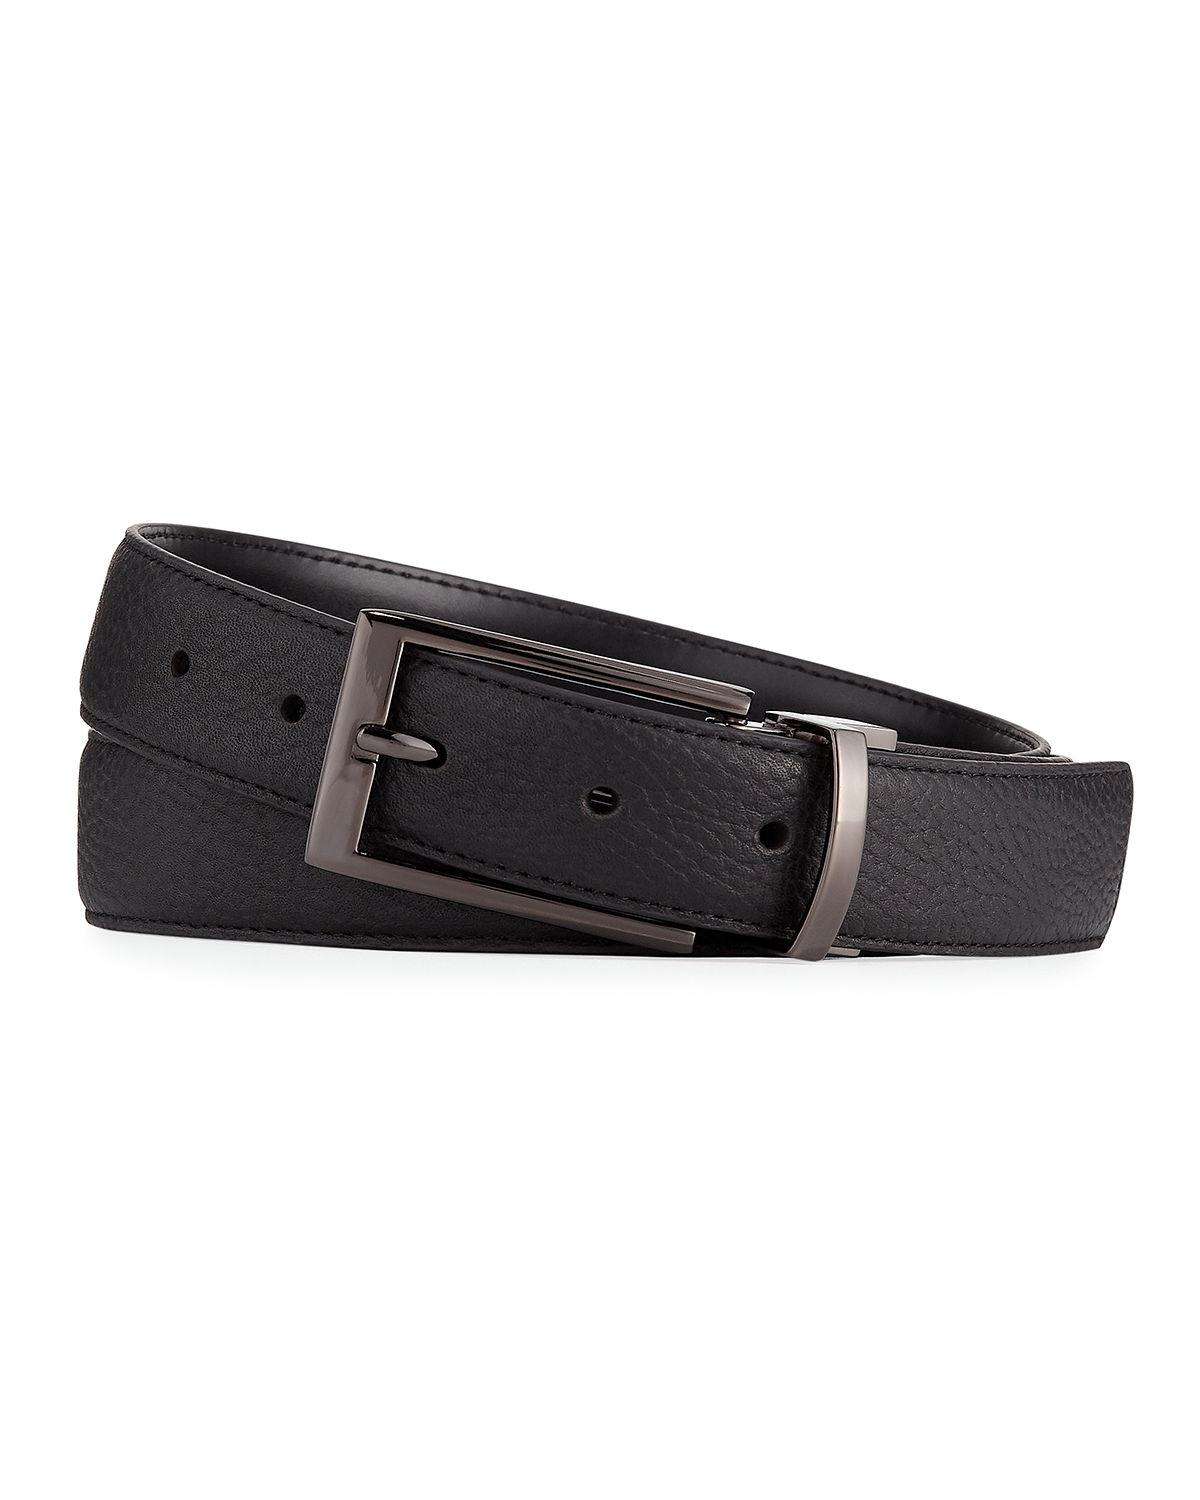 Neiman Marcus Smooth Pebbled Leather Belt in Black for Men - Lyst